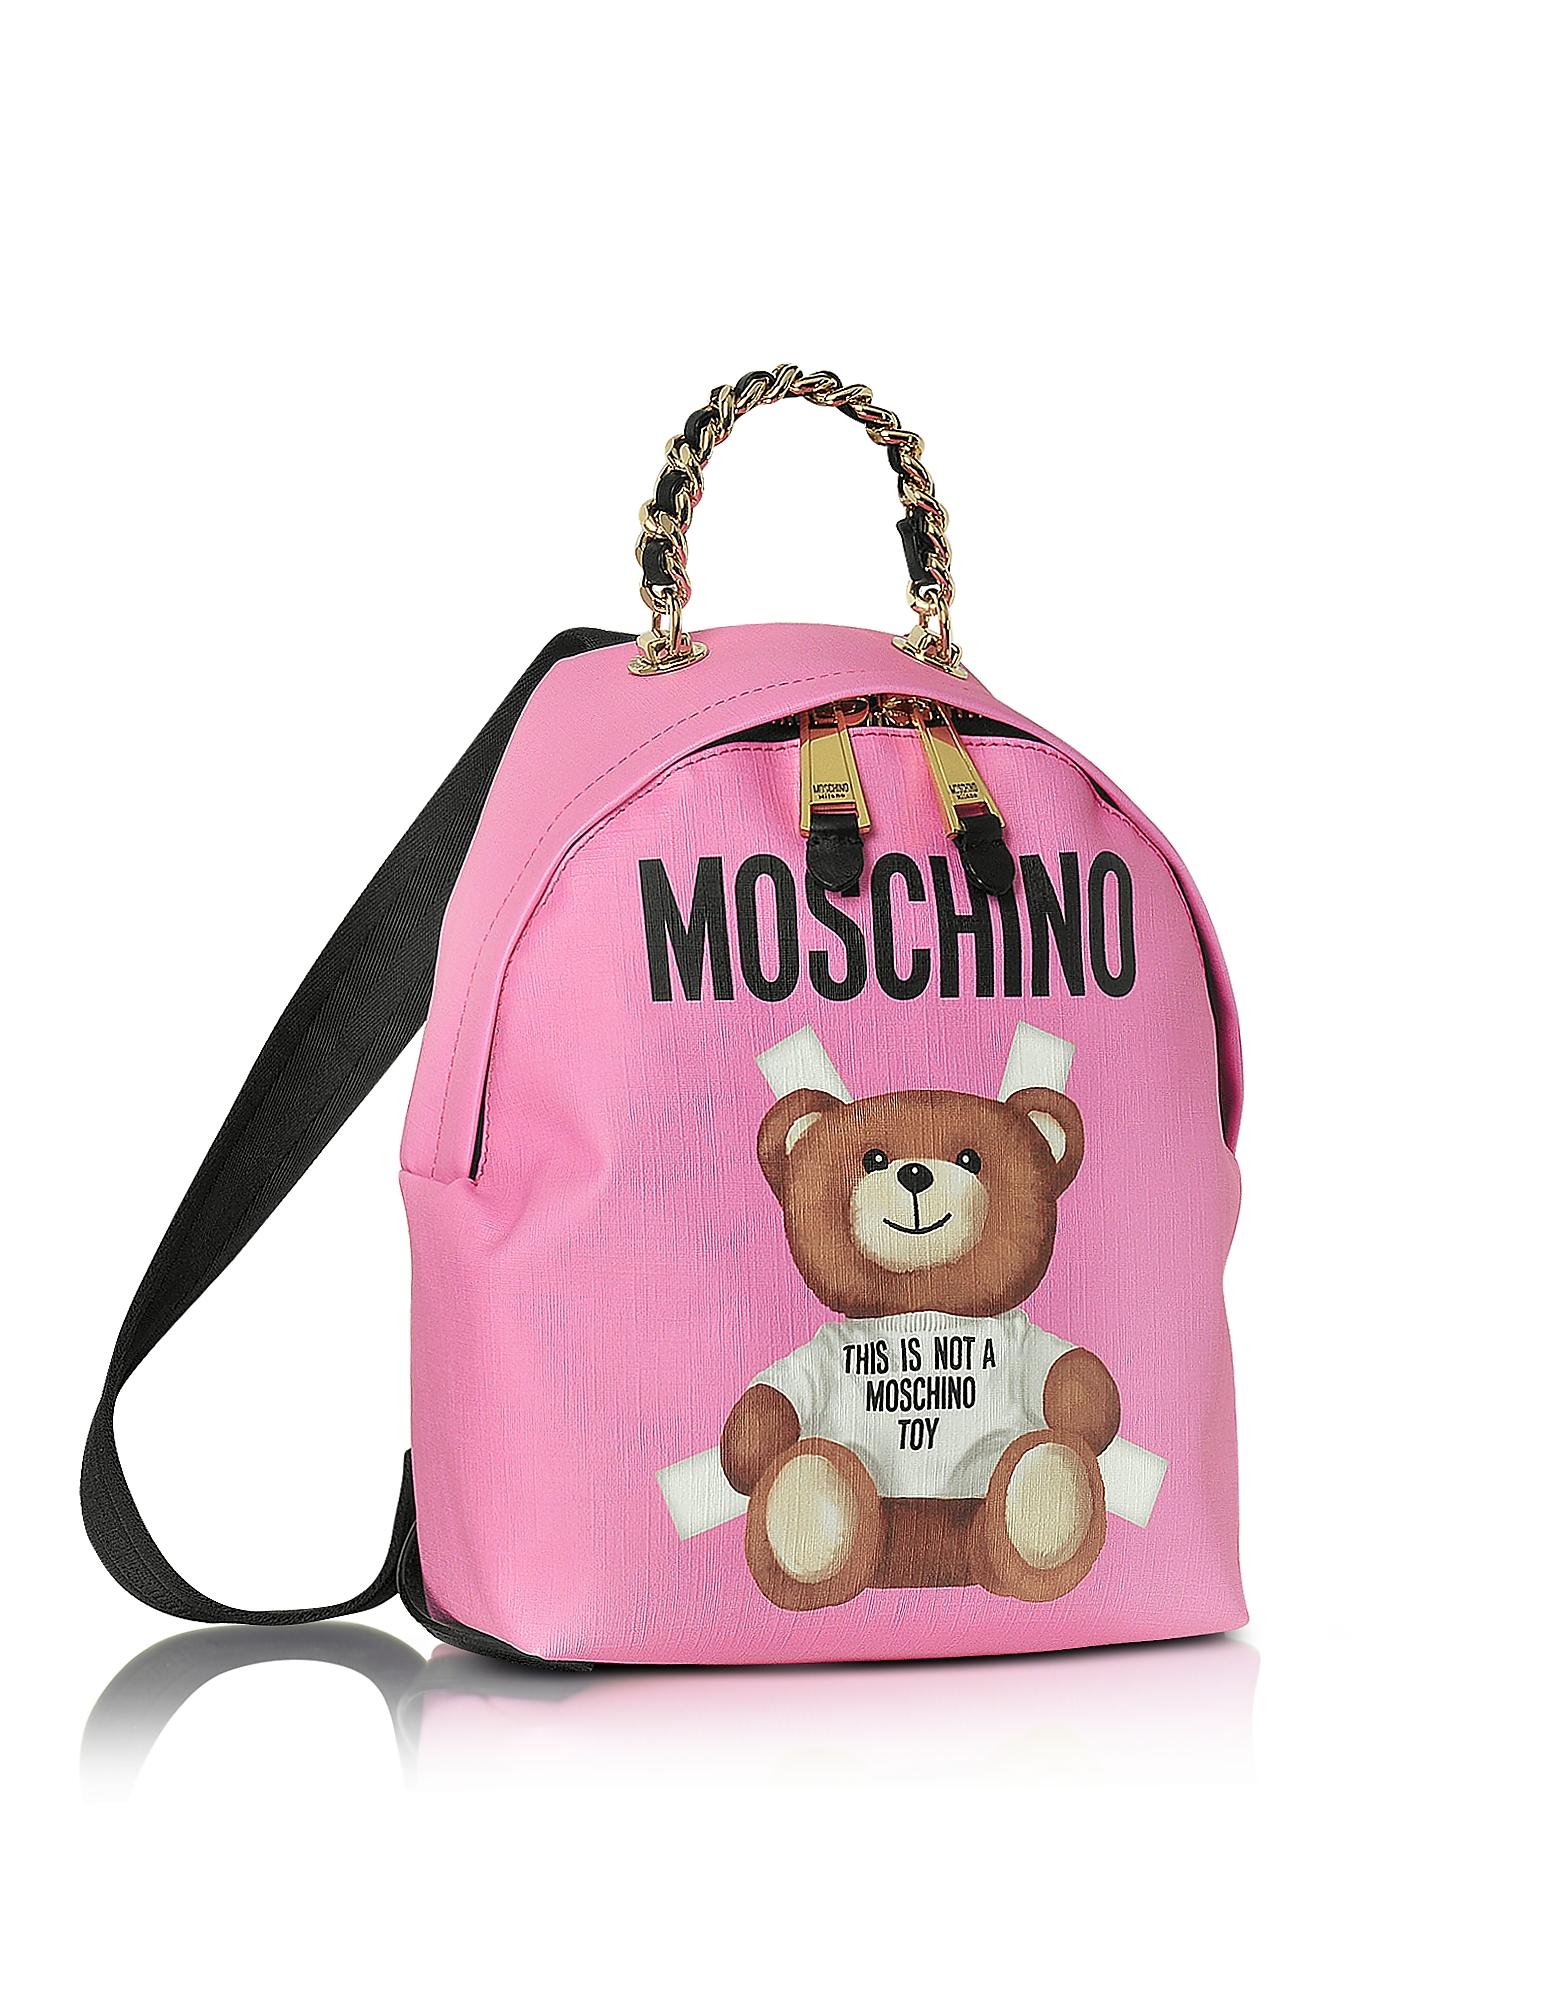 Lyst - Moschino Teddy Bear Pink Saffiano Leather Backpack in Pink